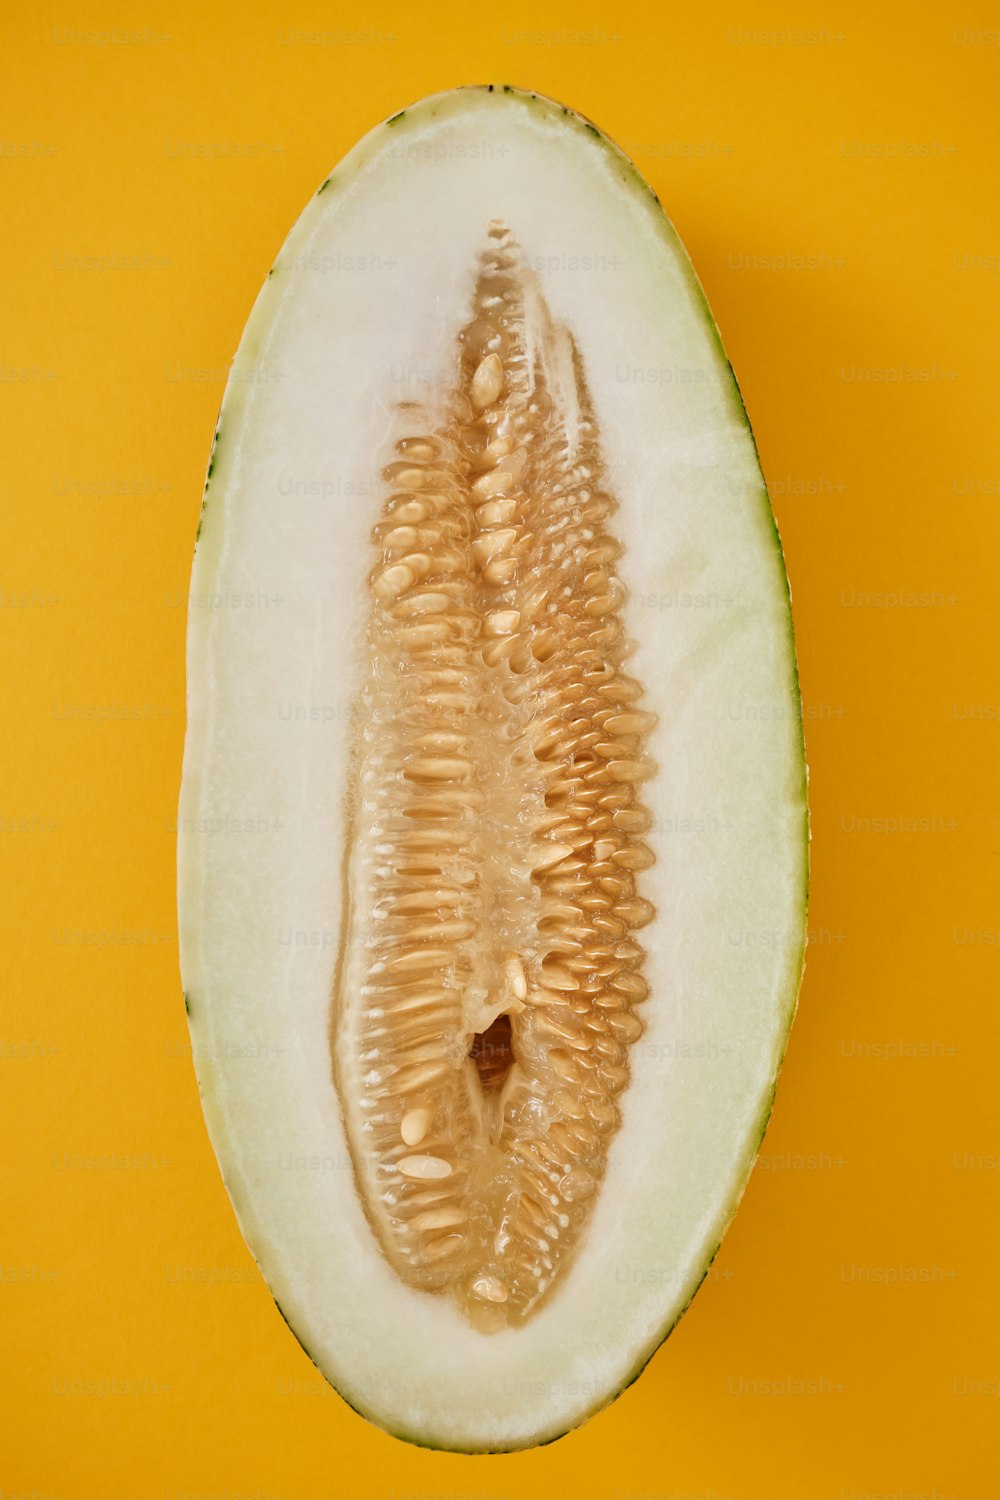 a cut in half melon on a yellow background